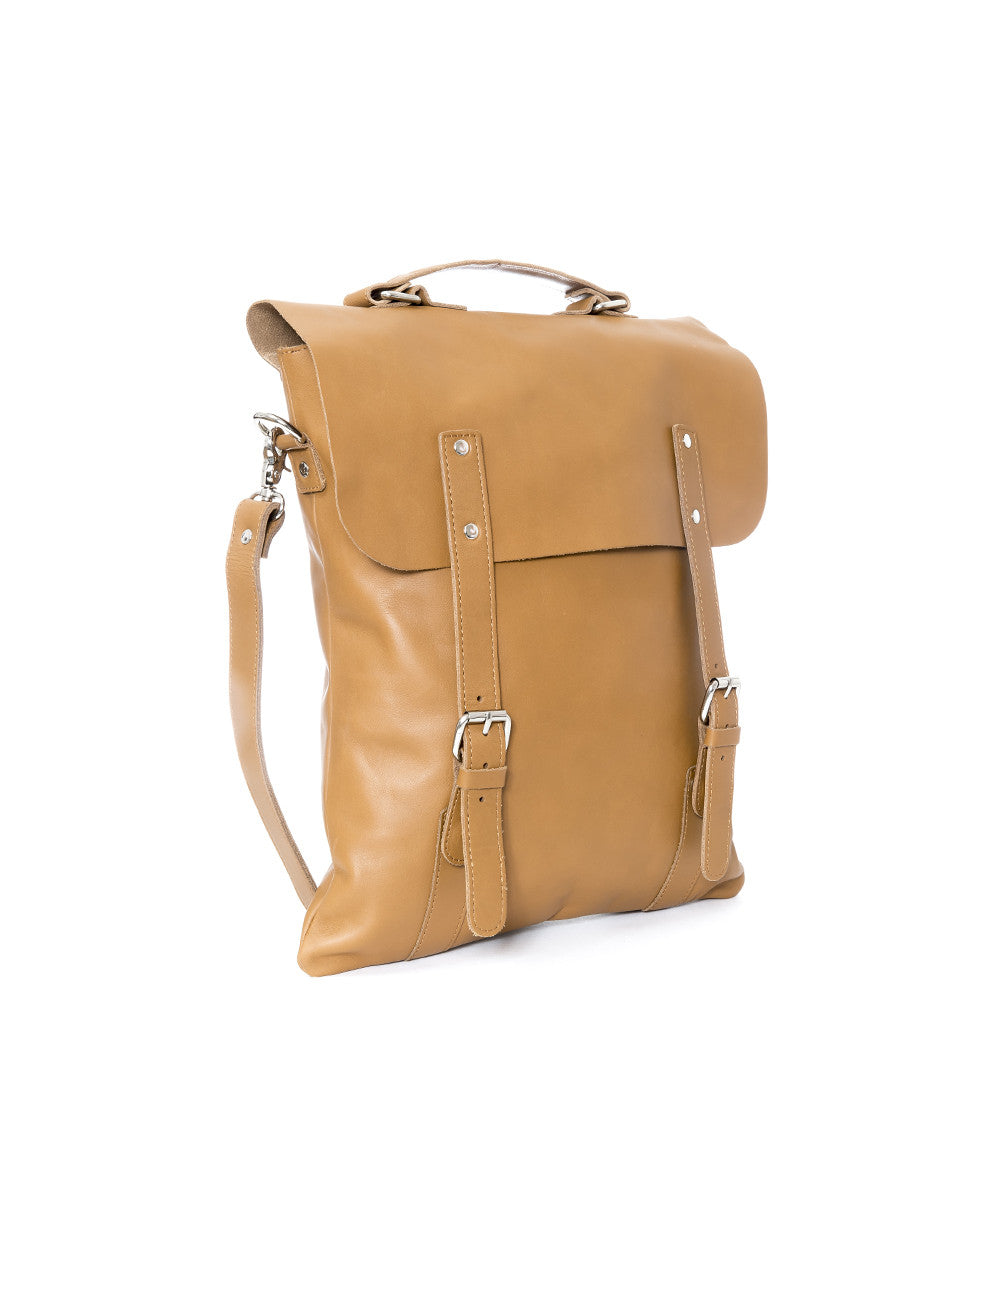 Enter Leather Messenger Tote in Tan - Mildblend Supply Co